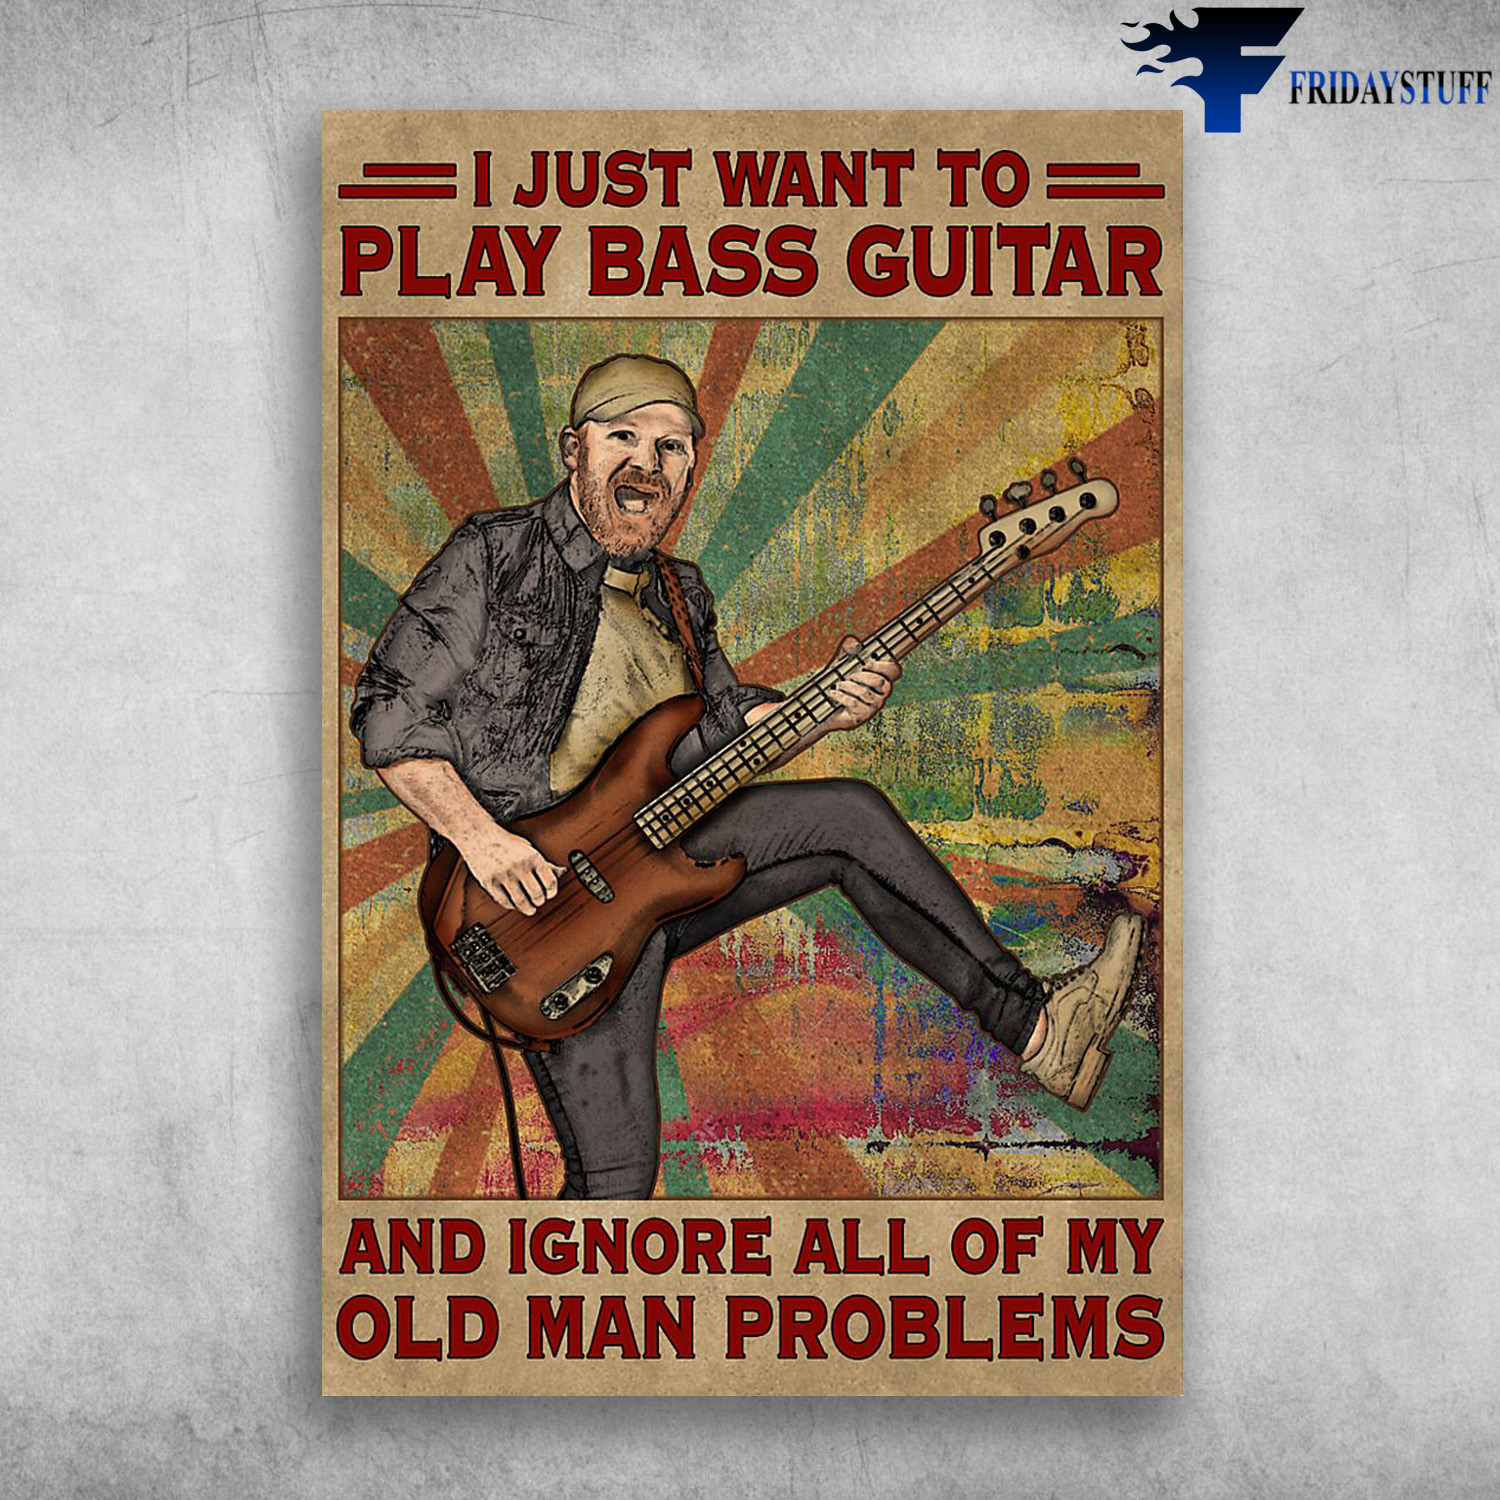 Man Playing Bass Guitar - I Just Want To Play Bass Guitar, And Ignore All Of My Old Man Problems